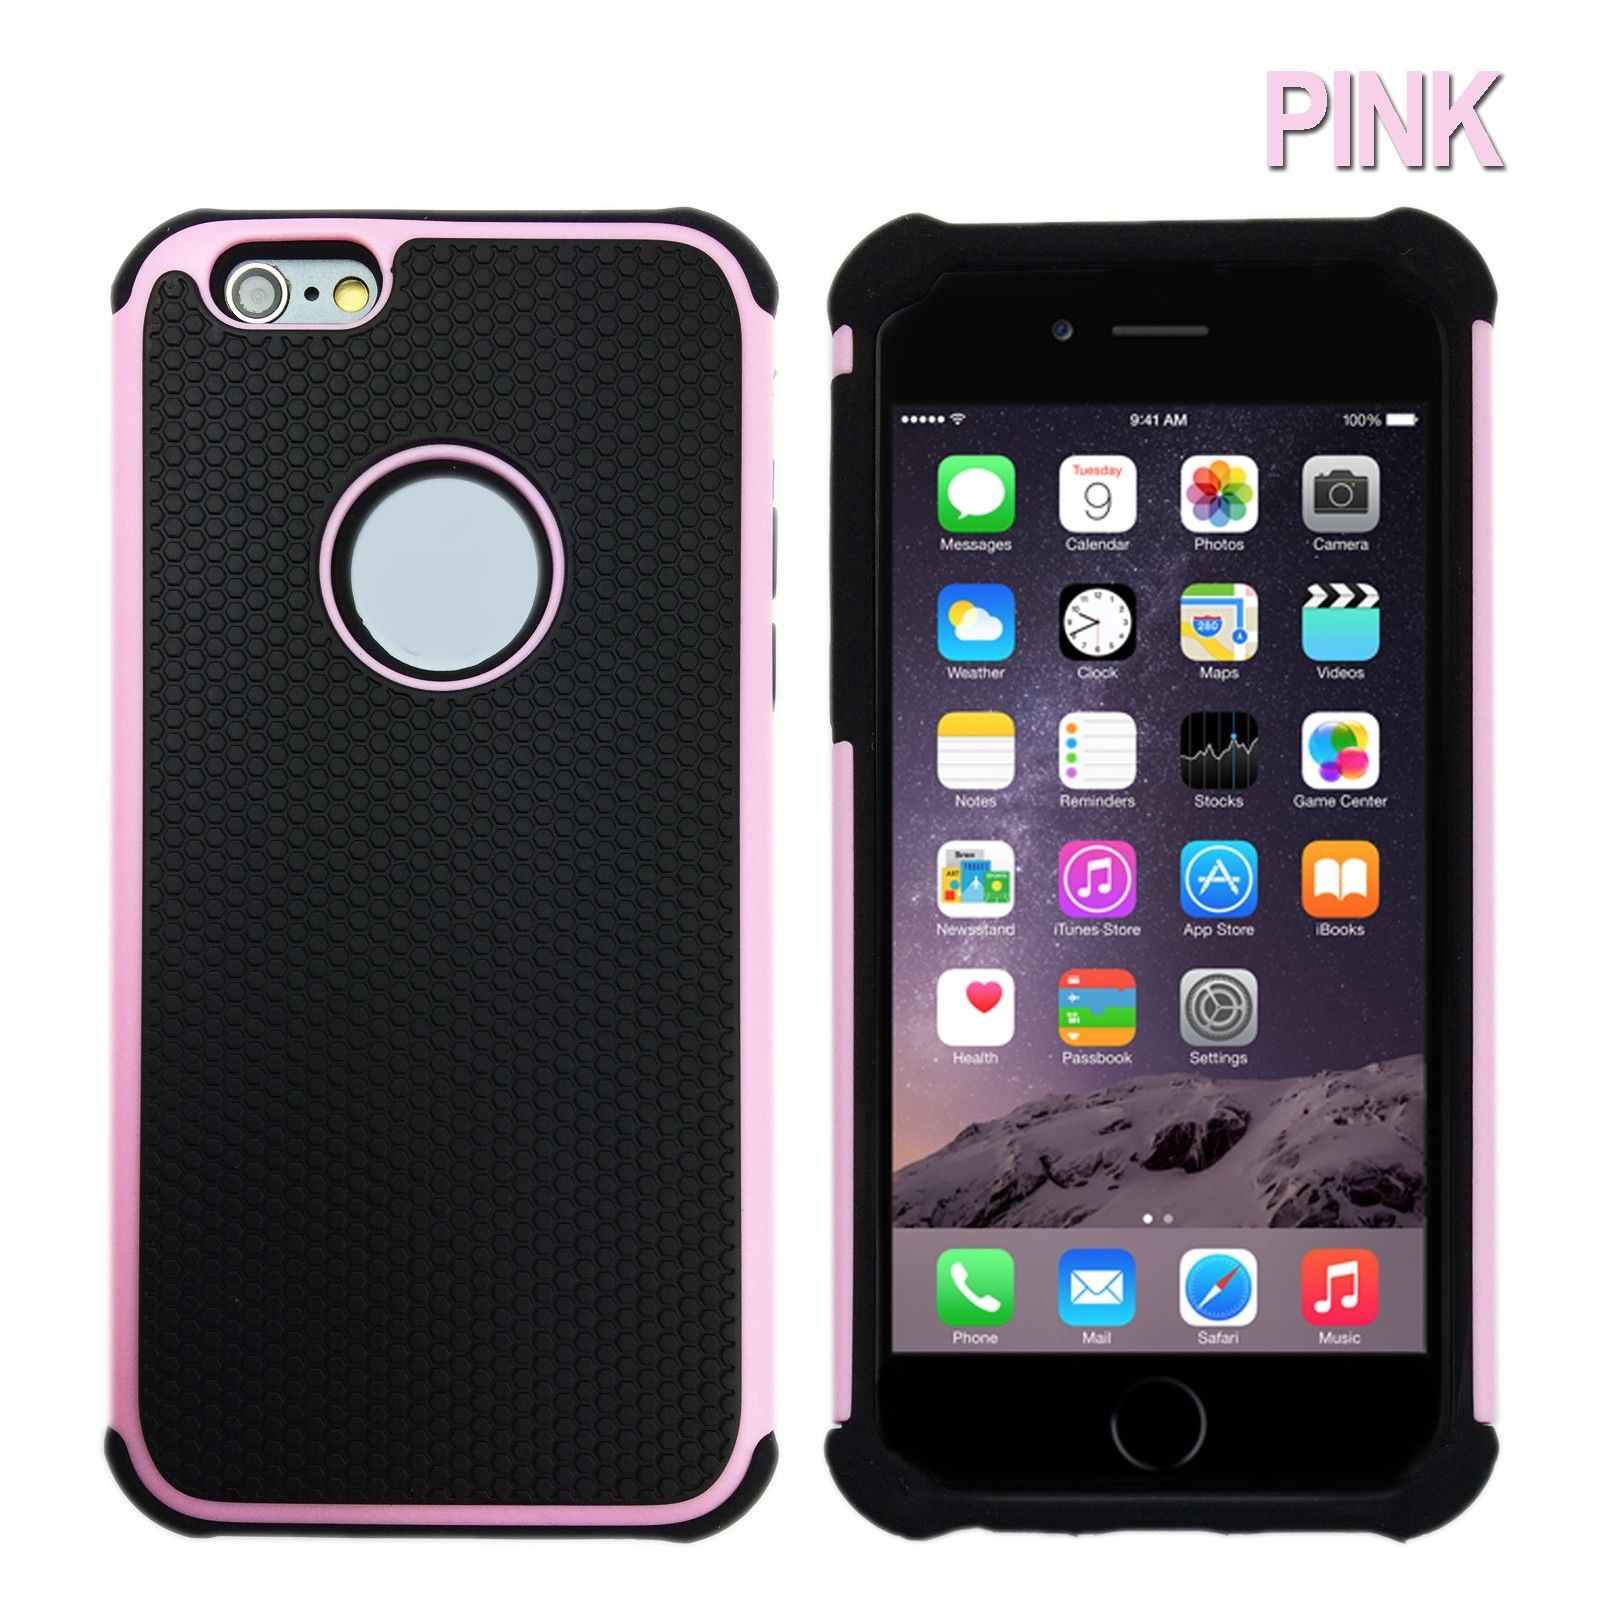 iPhone Shock Proof Tough Hard Armor Heavy Duty Case Cover